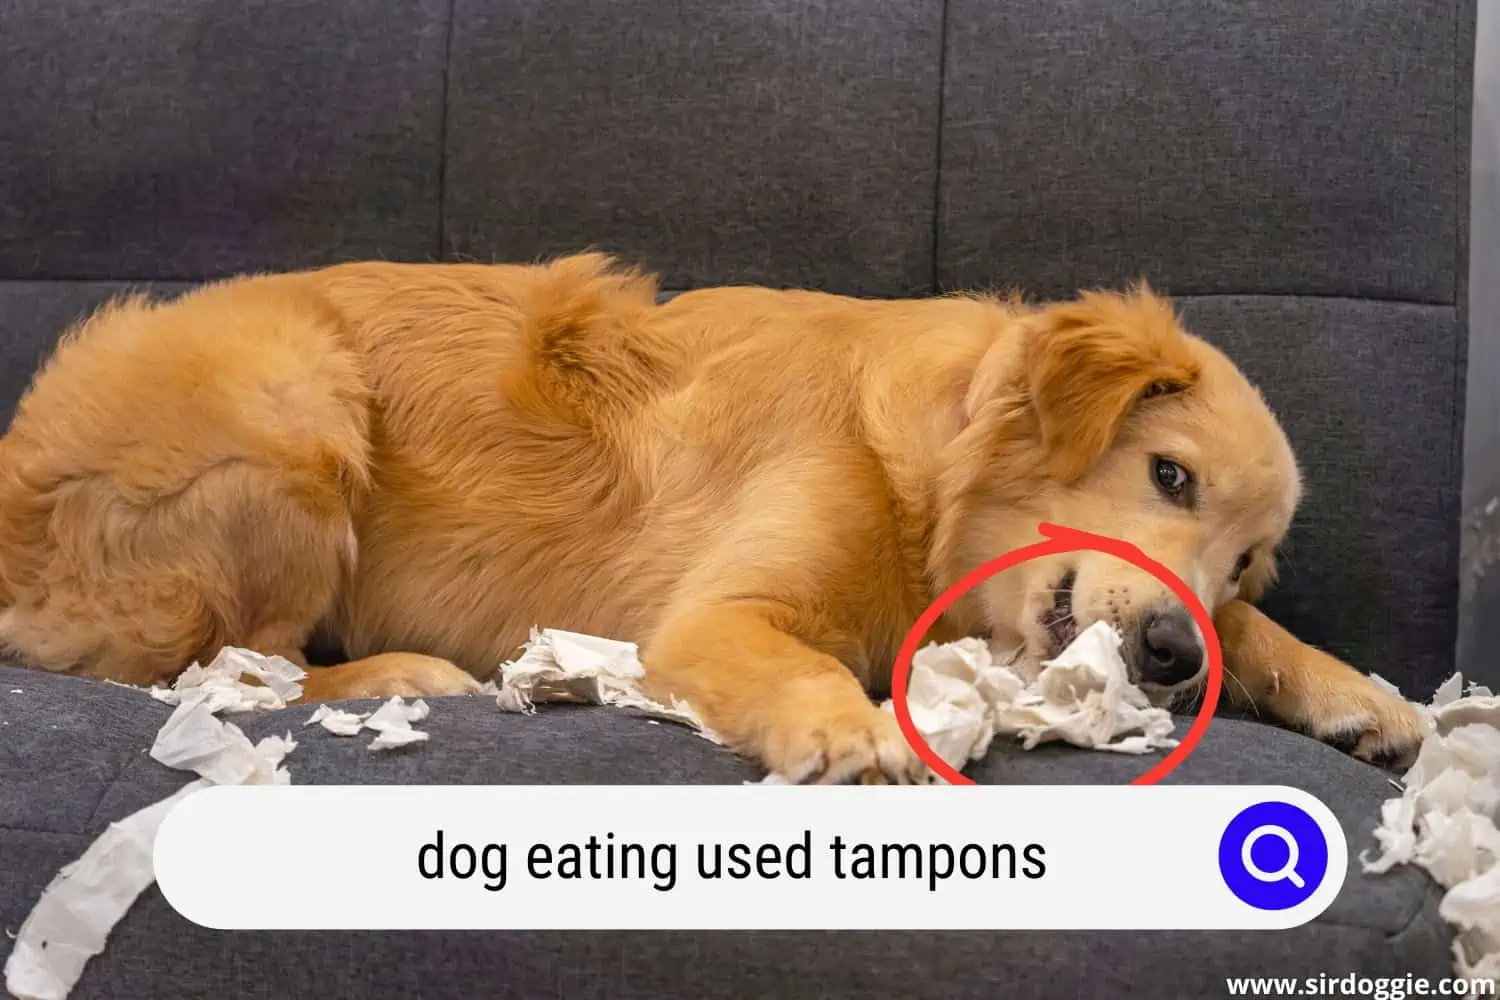 A brown dog lying in a couch while eating tampons